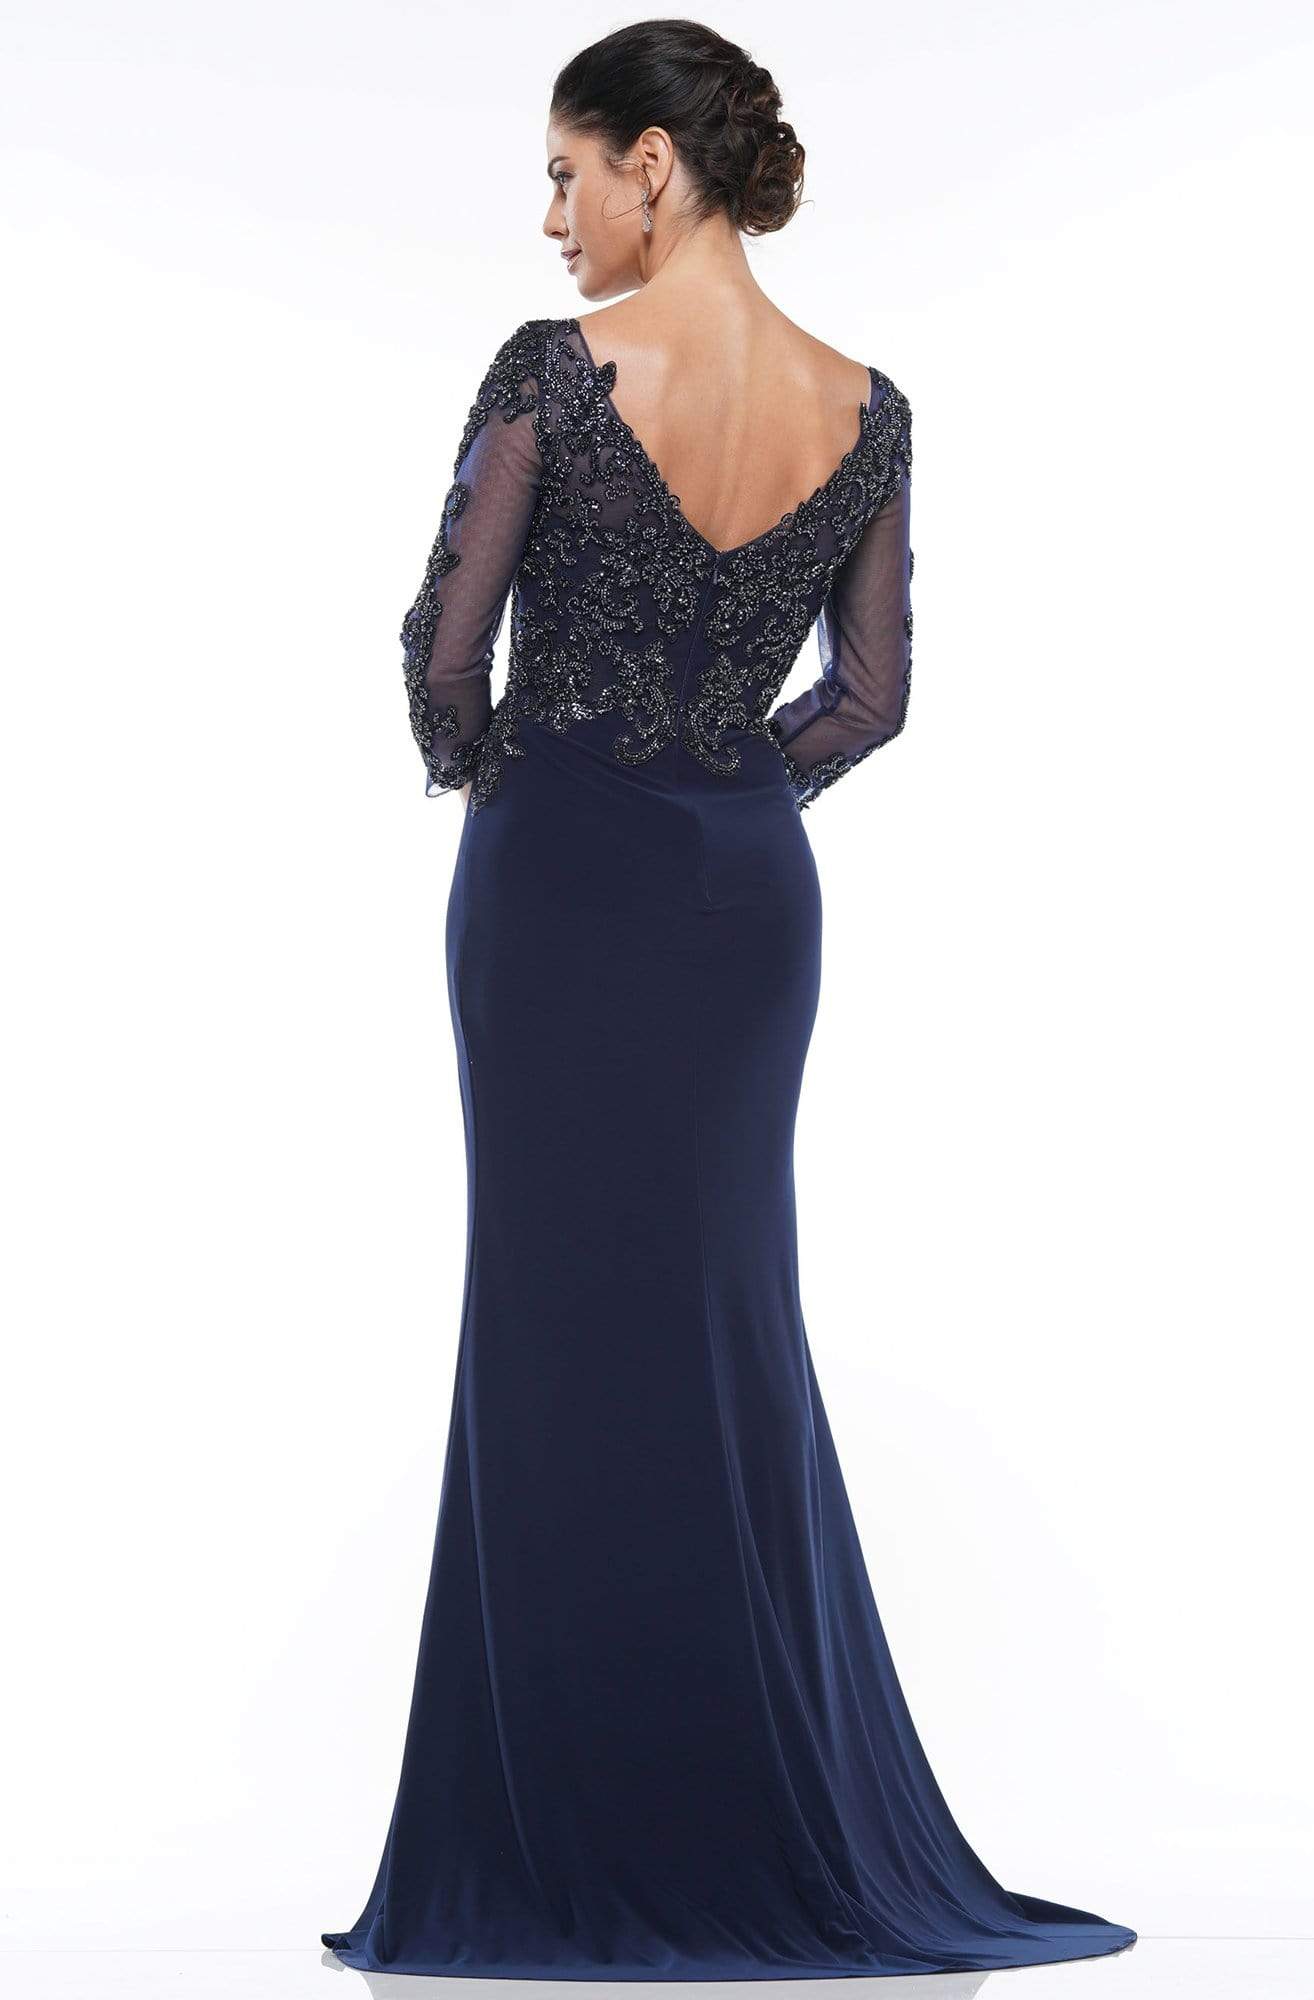 Marsoni By Colors - MV1017 Beaded Lace Illusion Neck Jersey Gown Mother of the Bride Dresses